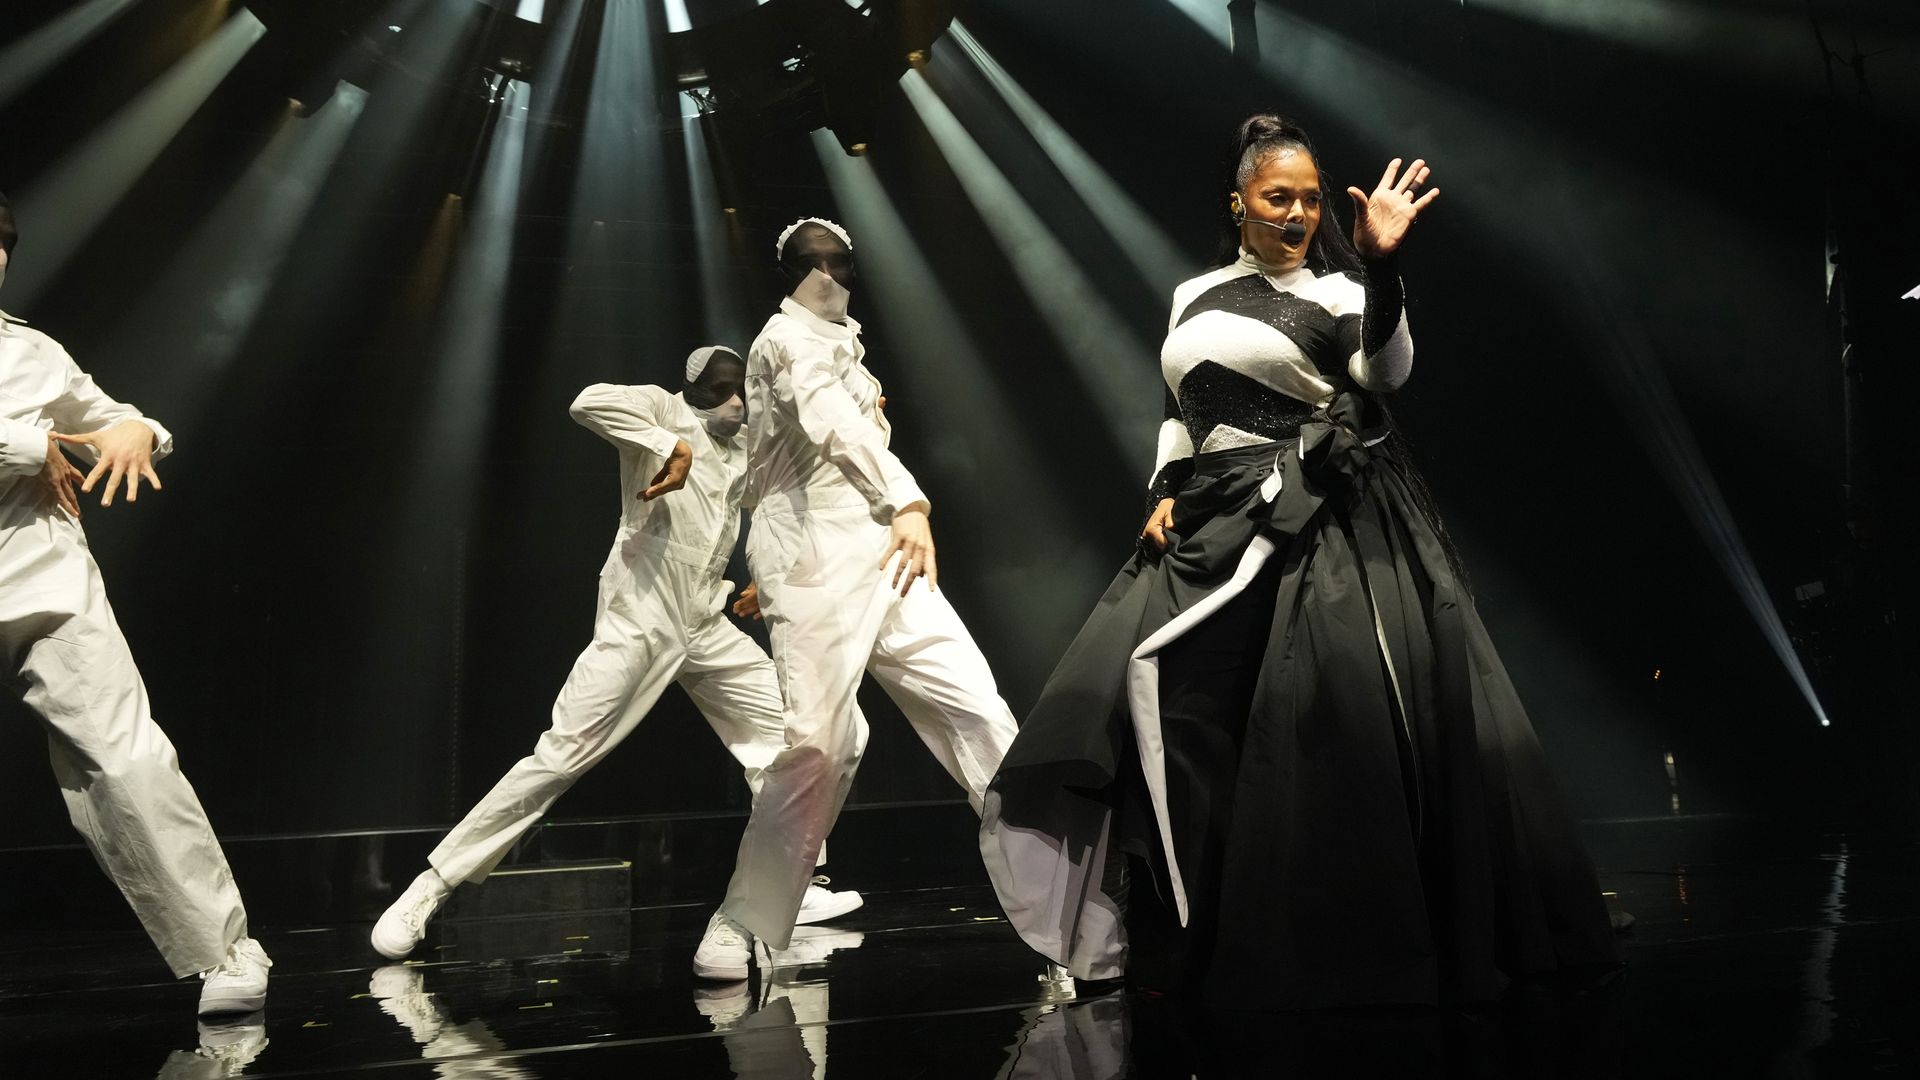 Janet Jackson performing on stage in a black and white outfit with dancers in white behind her